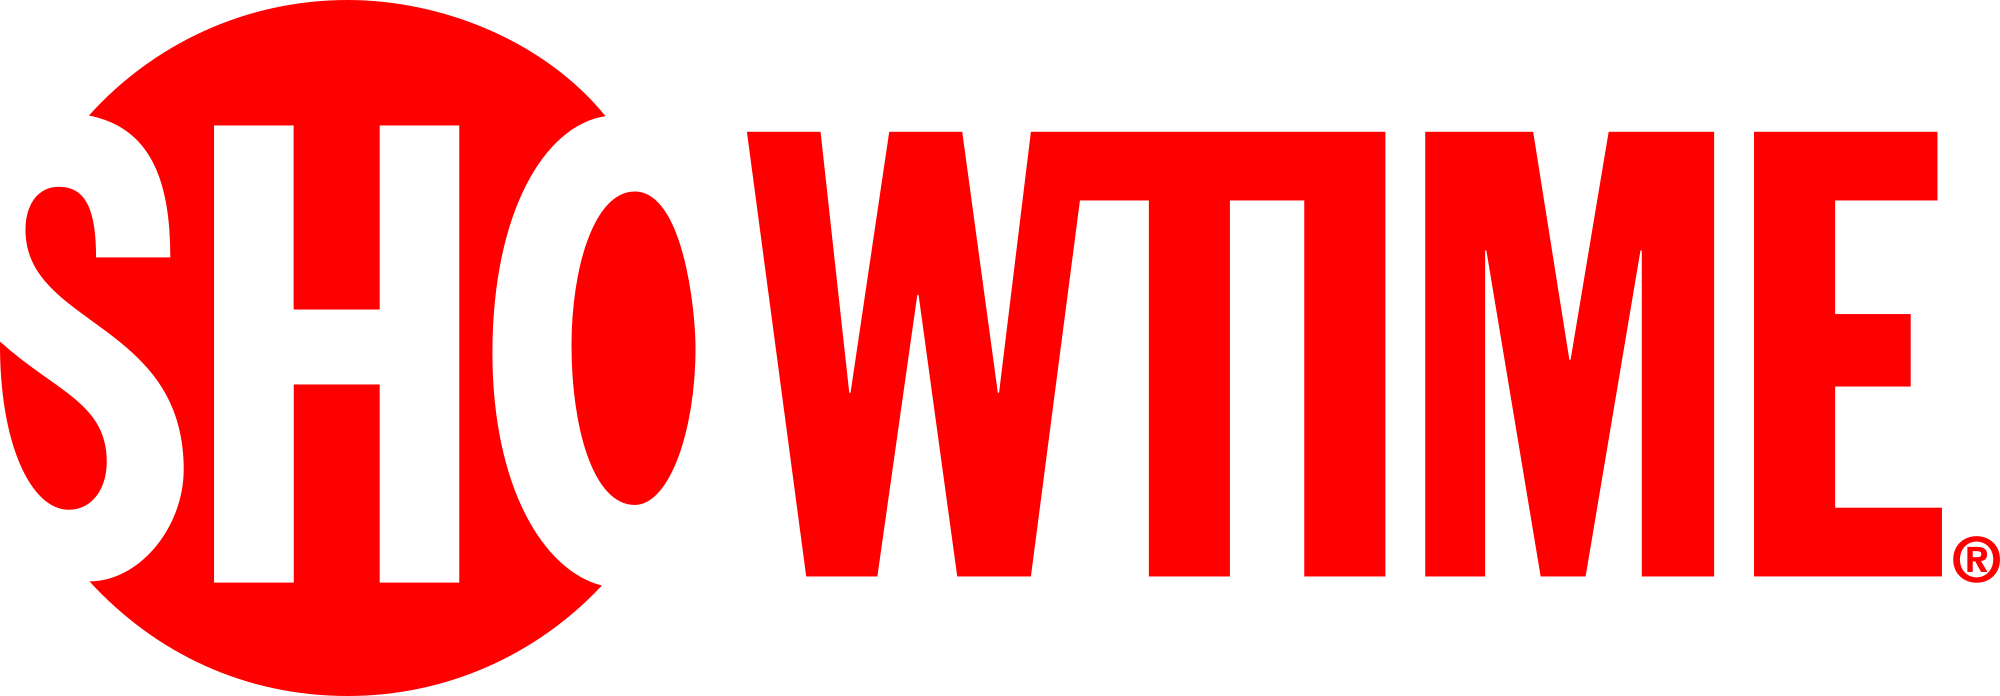 Showtime Logo - File:Showtime.svg - Wikimedia Commons